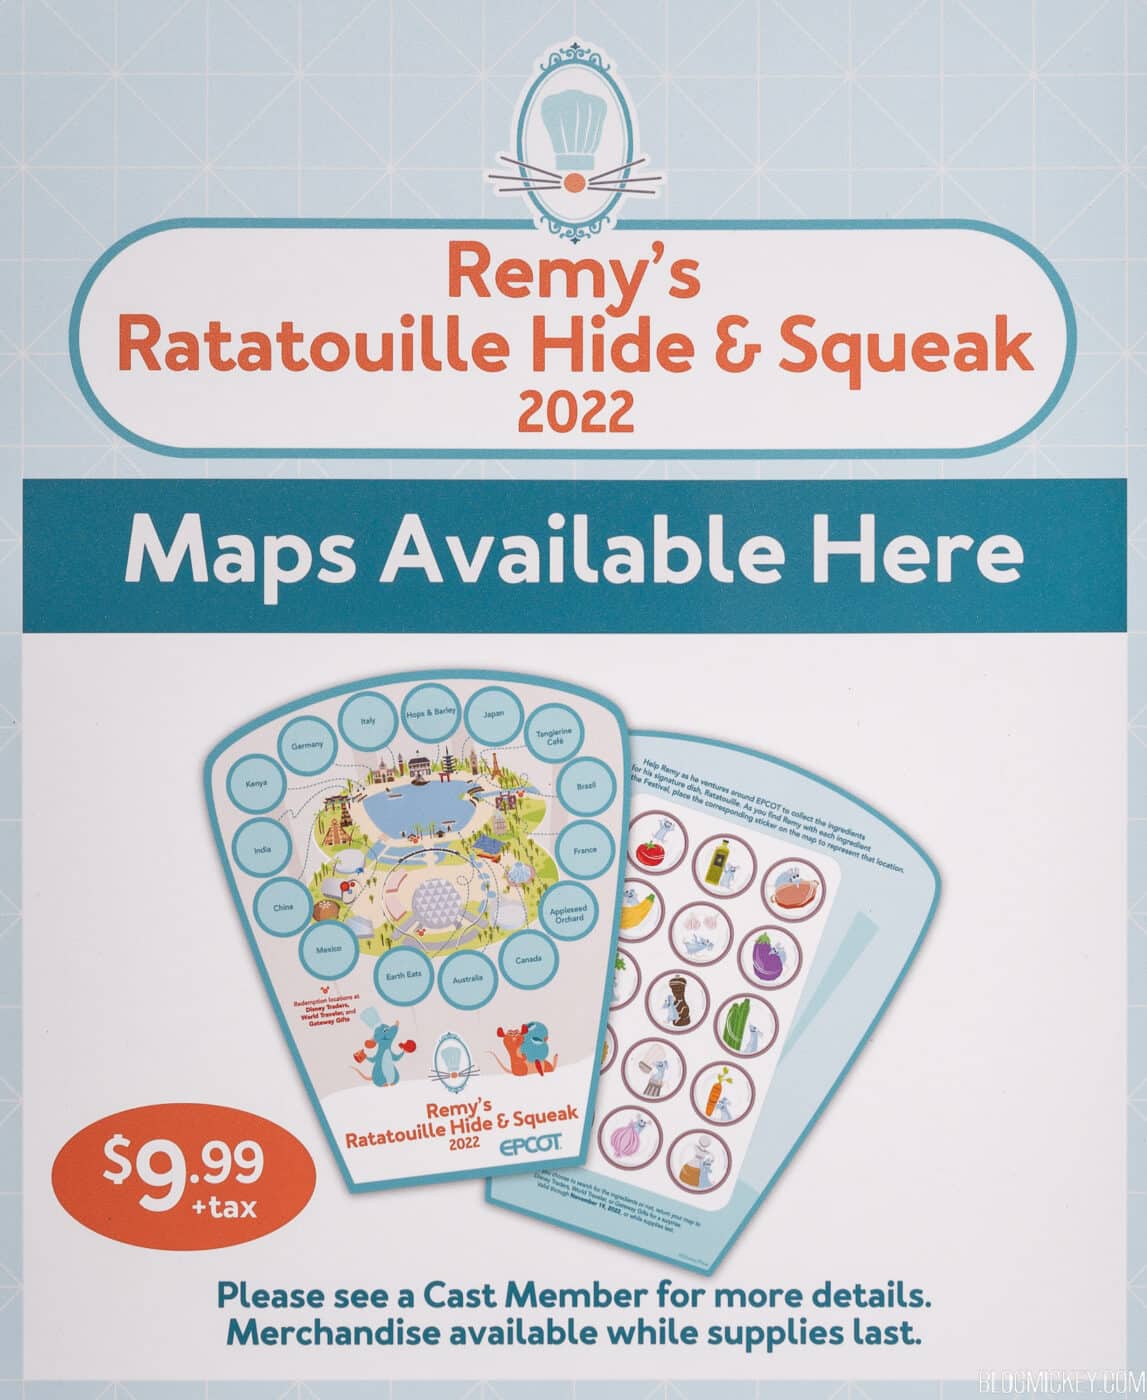 Prizes Revealed for Remy’s Ratatouille Hide & Squeak Scavenger Hunt at